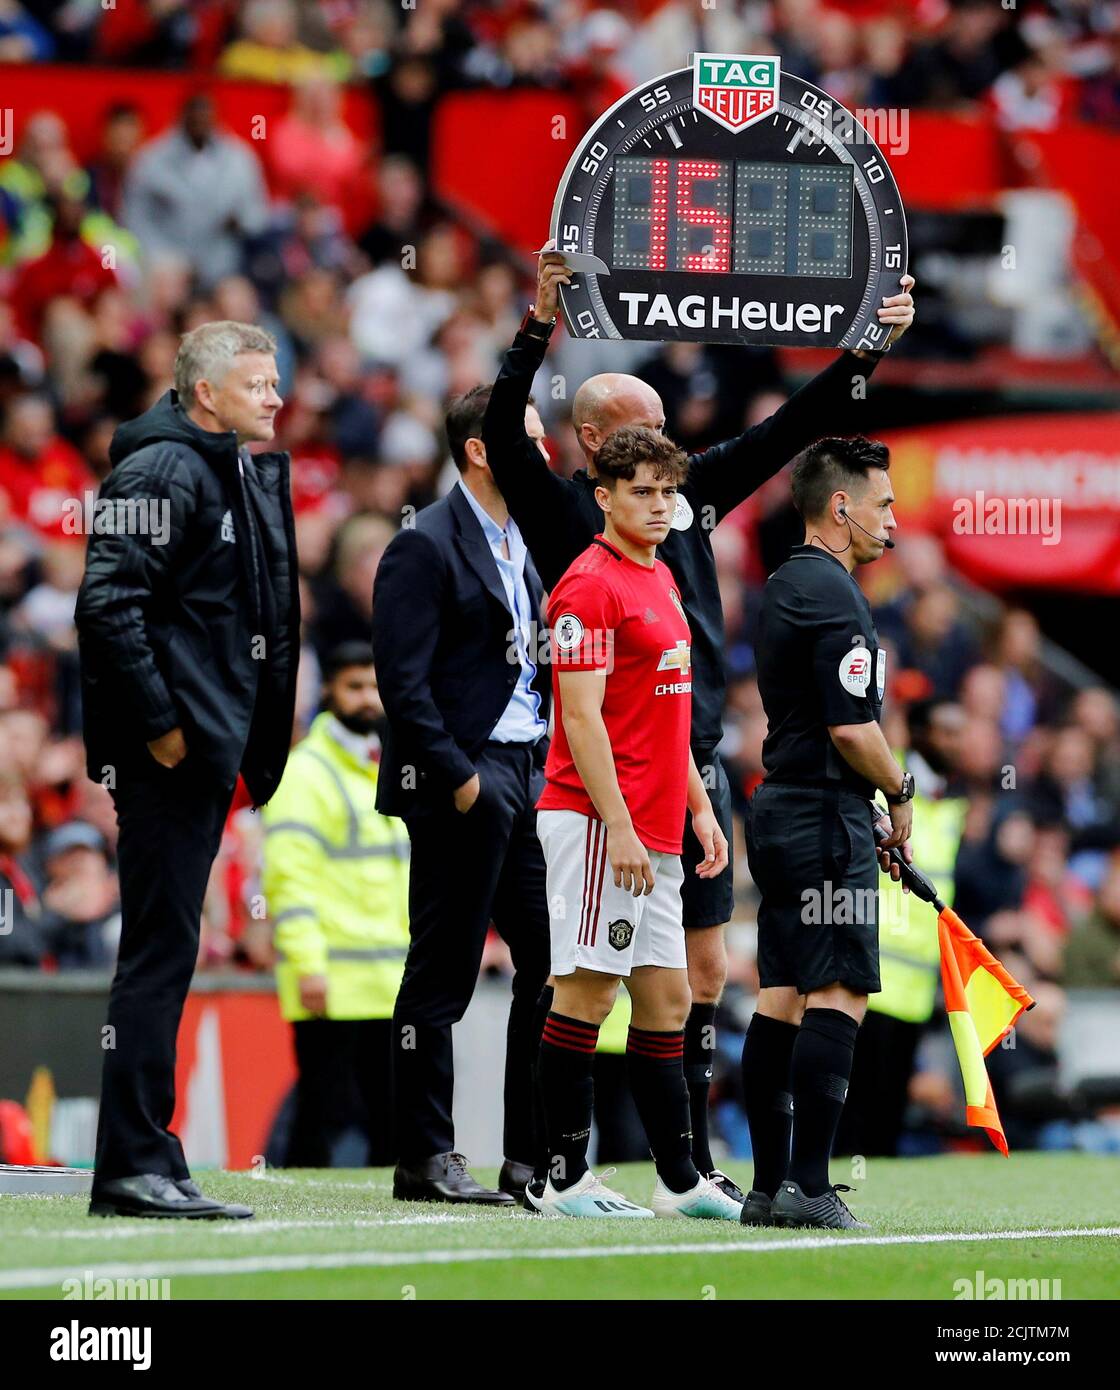 Soccer Football - Premier League - Manchester United v Chelsea - Old Trafford, Manchester, Britain - August 11, 2019  Manchester United's Daniel James comes on as a substitute to replace Andreas Pereira  REUTERS/Phil Noble  EDITORIAL USE ONLY. No use with unauthorized audio, video, data, fixture lists, club/league logos or 'live' services. Online in-match use limited to 75 images, no video emulation. No use in betting, games or single club/league/player publications.  Please contact your account representative for further details. Stock Photo